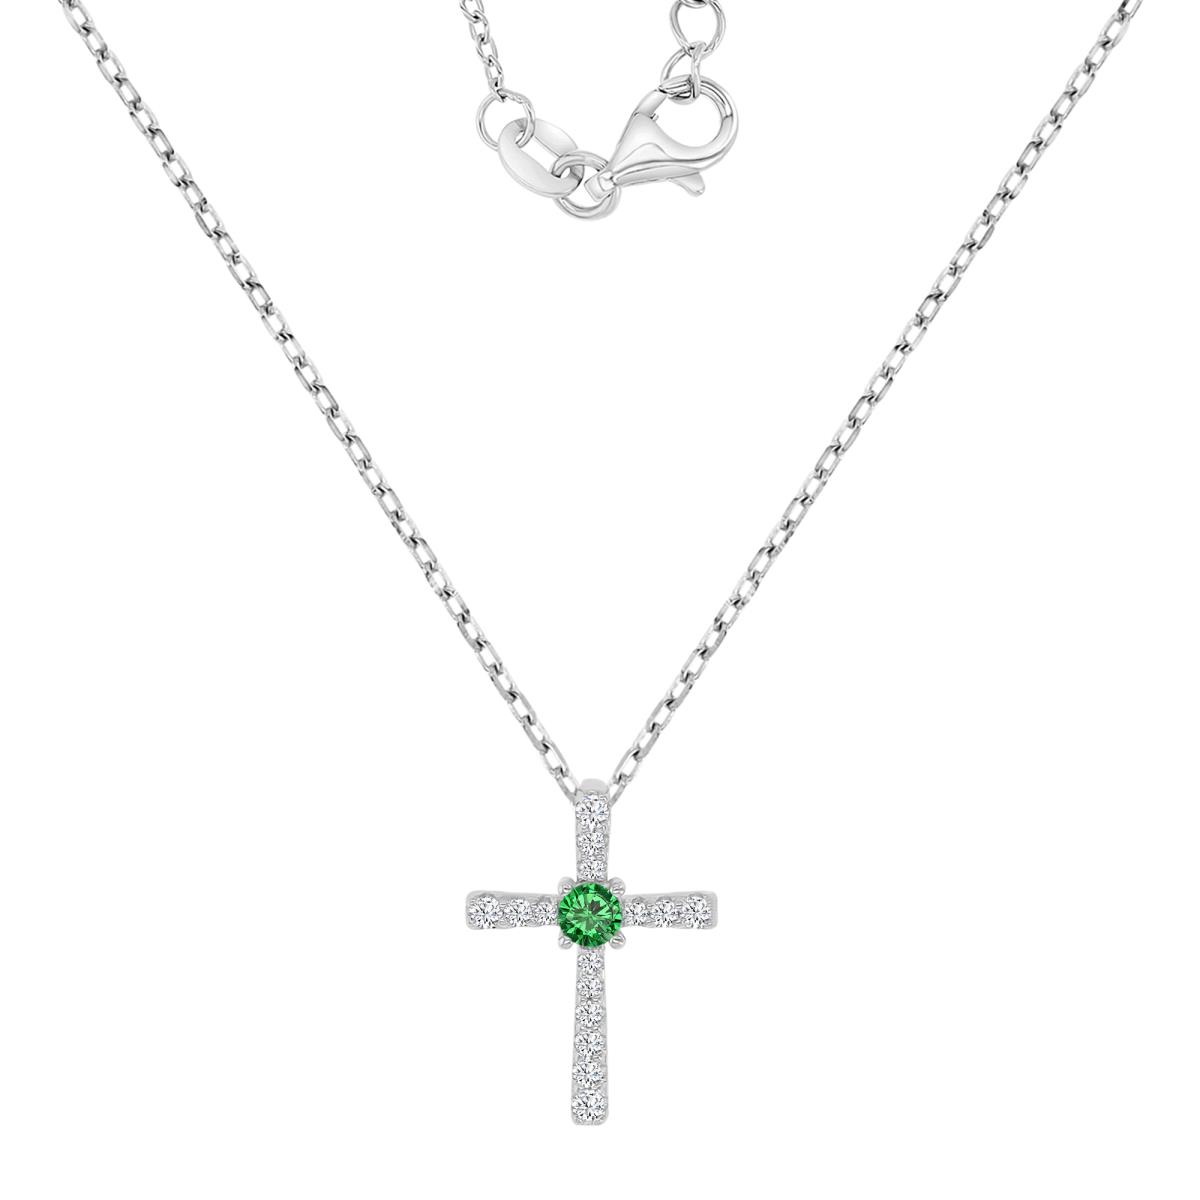 Sterling Silver Rhodium 16.8X12MM Polished Green Nano & White CZ Cross 16+2" Necklace